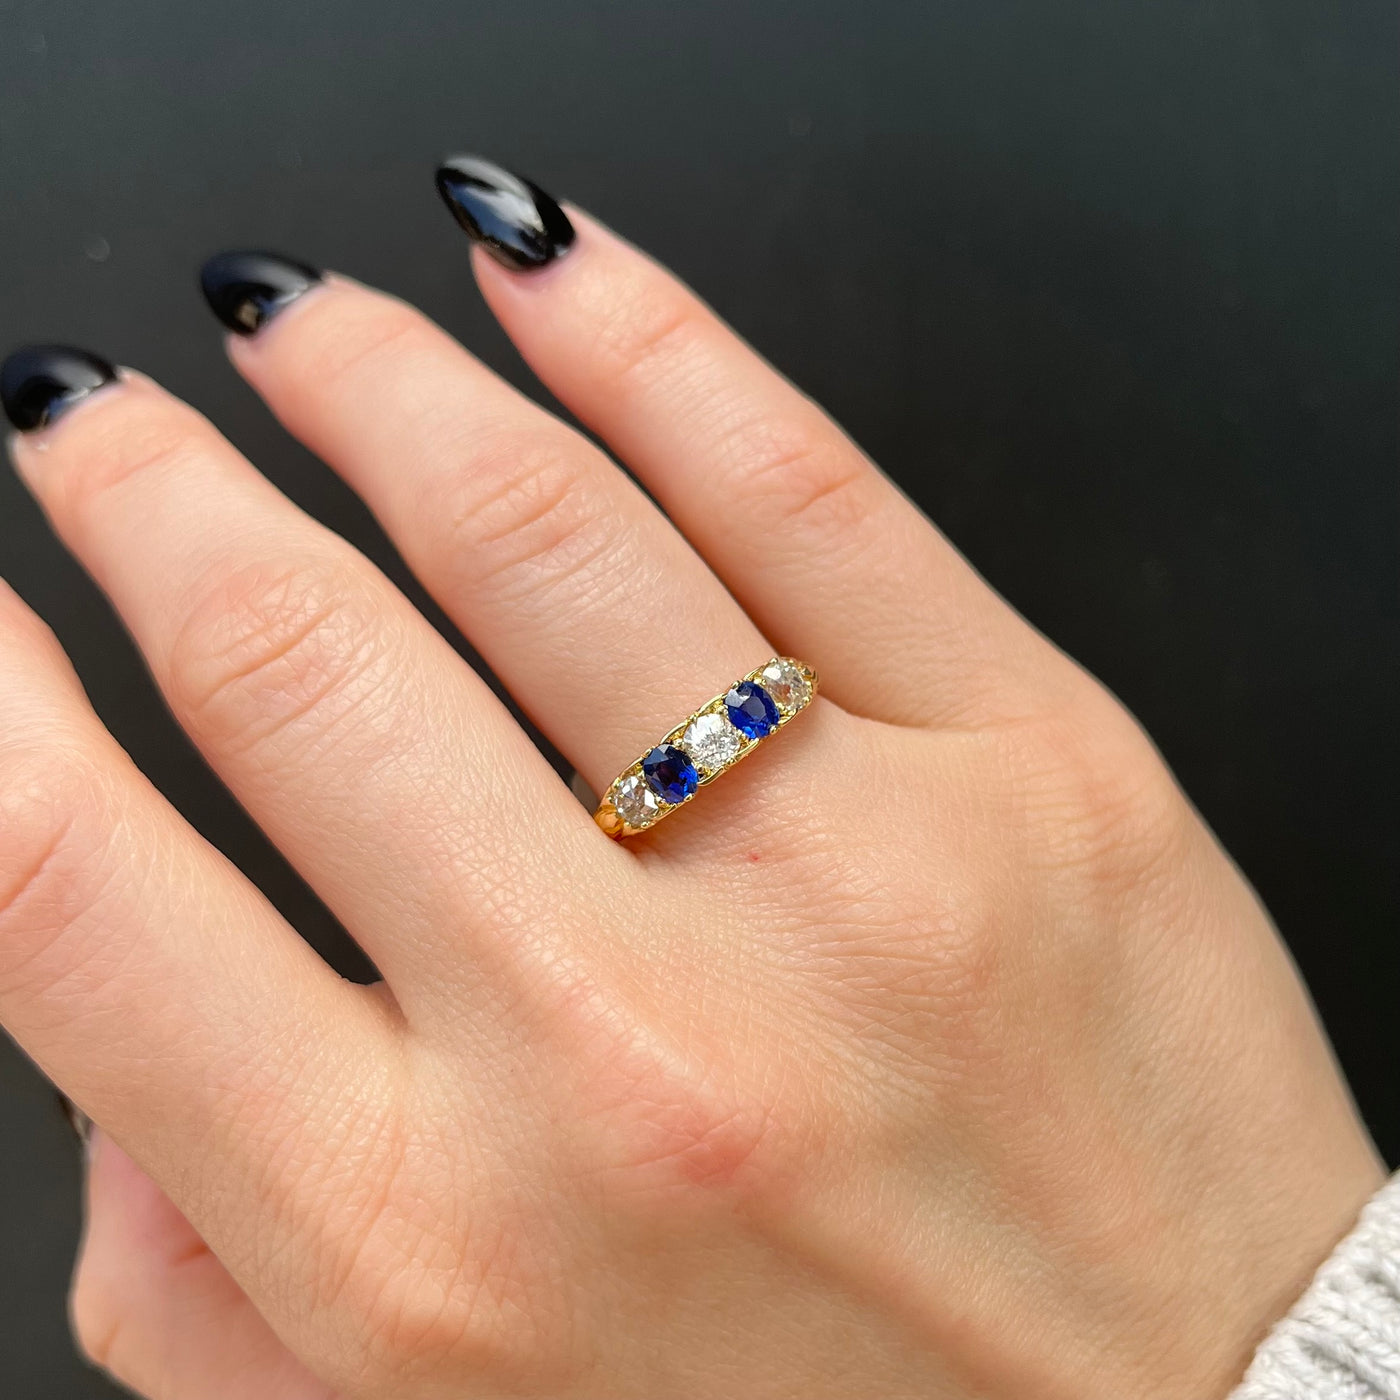 Victorian 18K Yellow Gold 0.70 CTW Old Mine Cut Diamond and Sapphire Ring